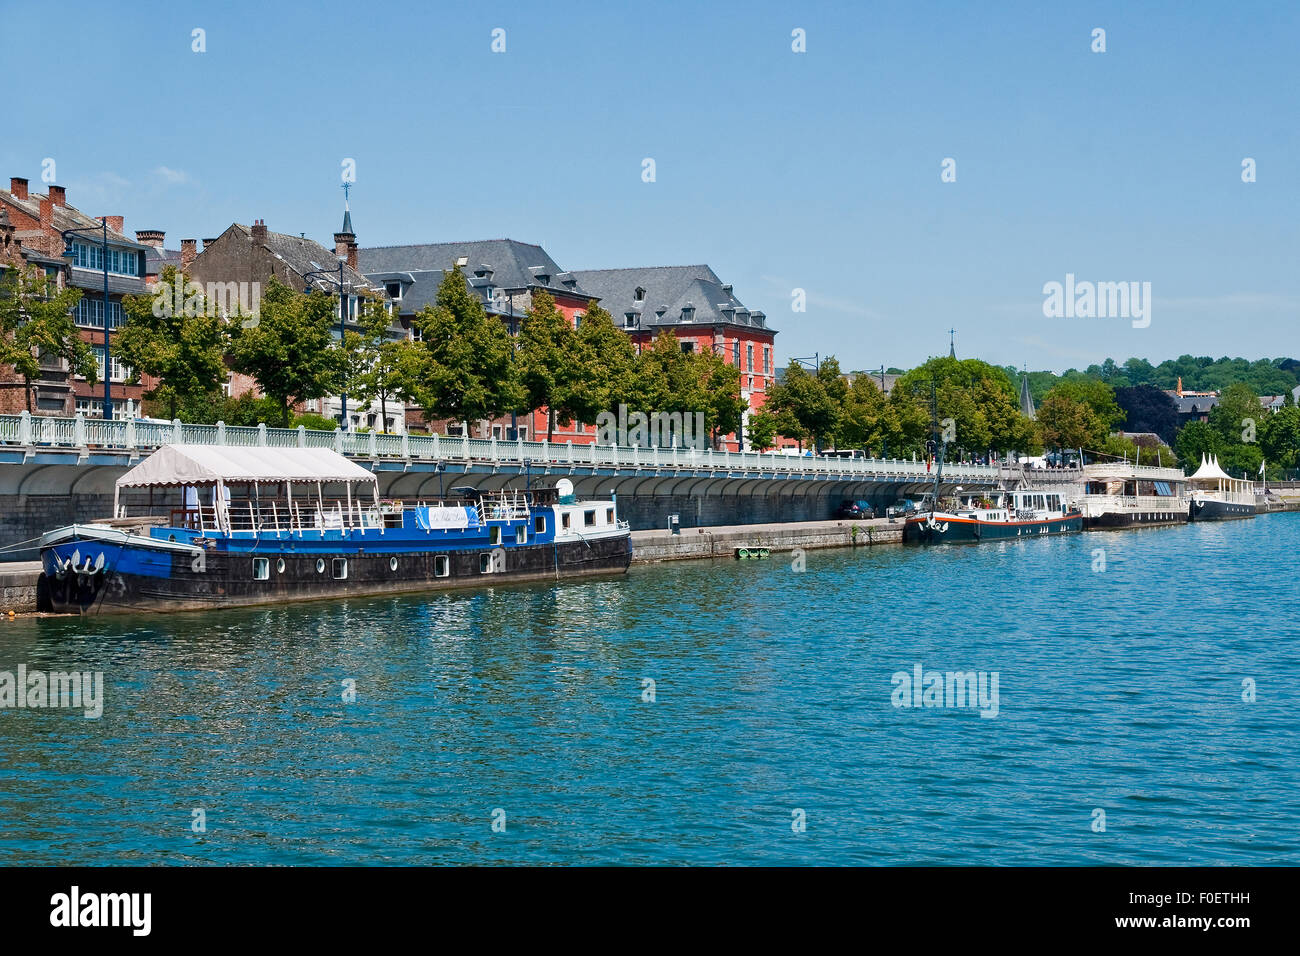 Hotel and event boats moored on the River Meuse in Namur, Belgium Stock Photo